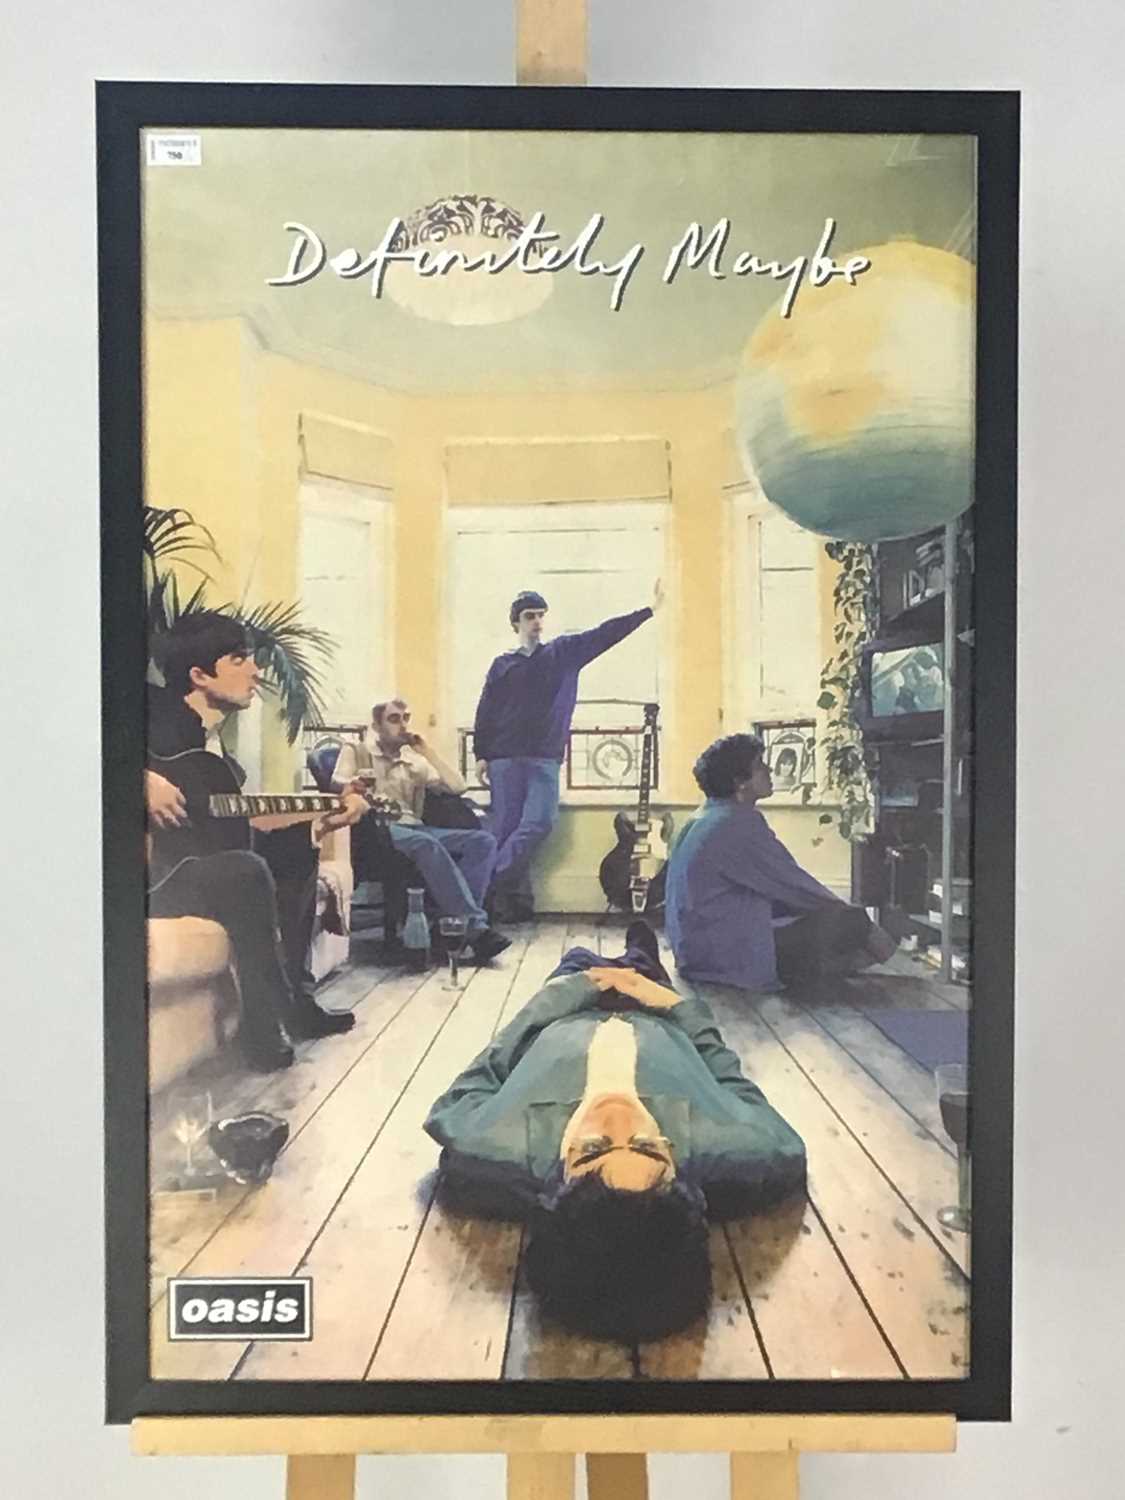 OASIS 'DEFINITELY MAYBE' ALBUM POSTER, ALONG WITH 'THE BEATLES THROUGH THE YEARS' POSTER - Image 2 of 3